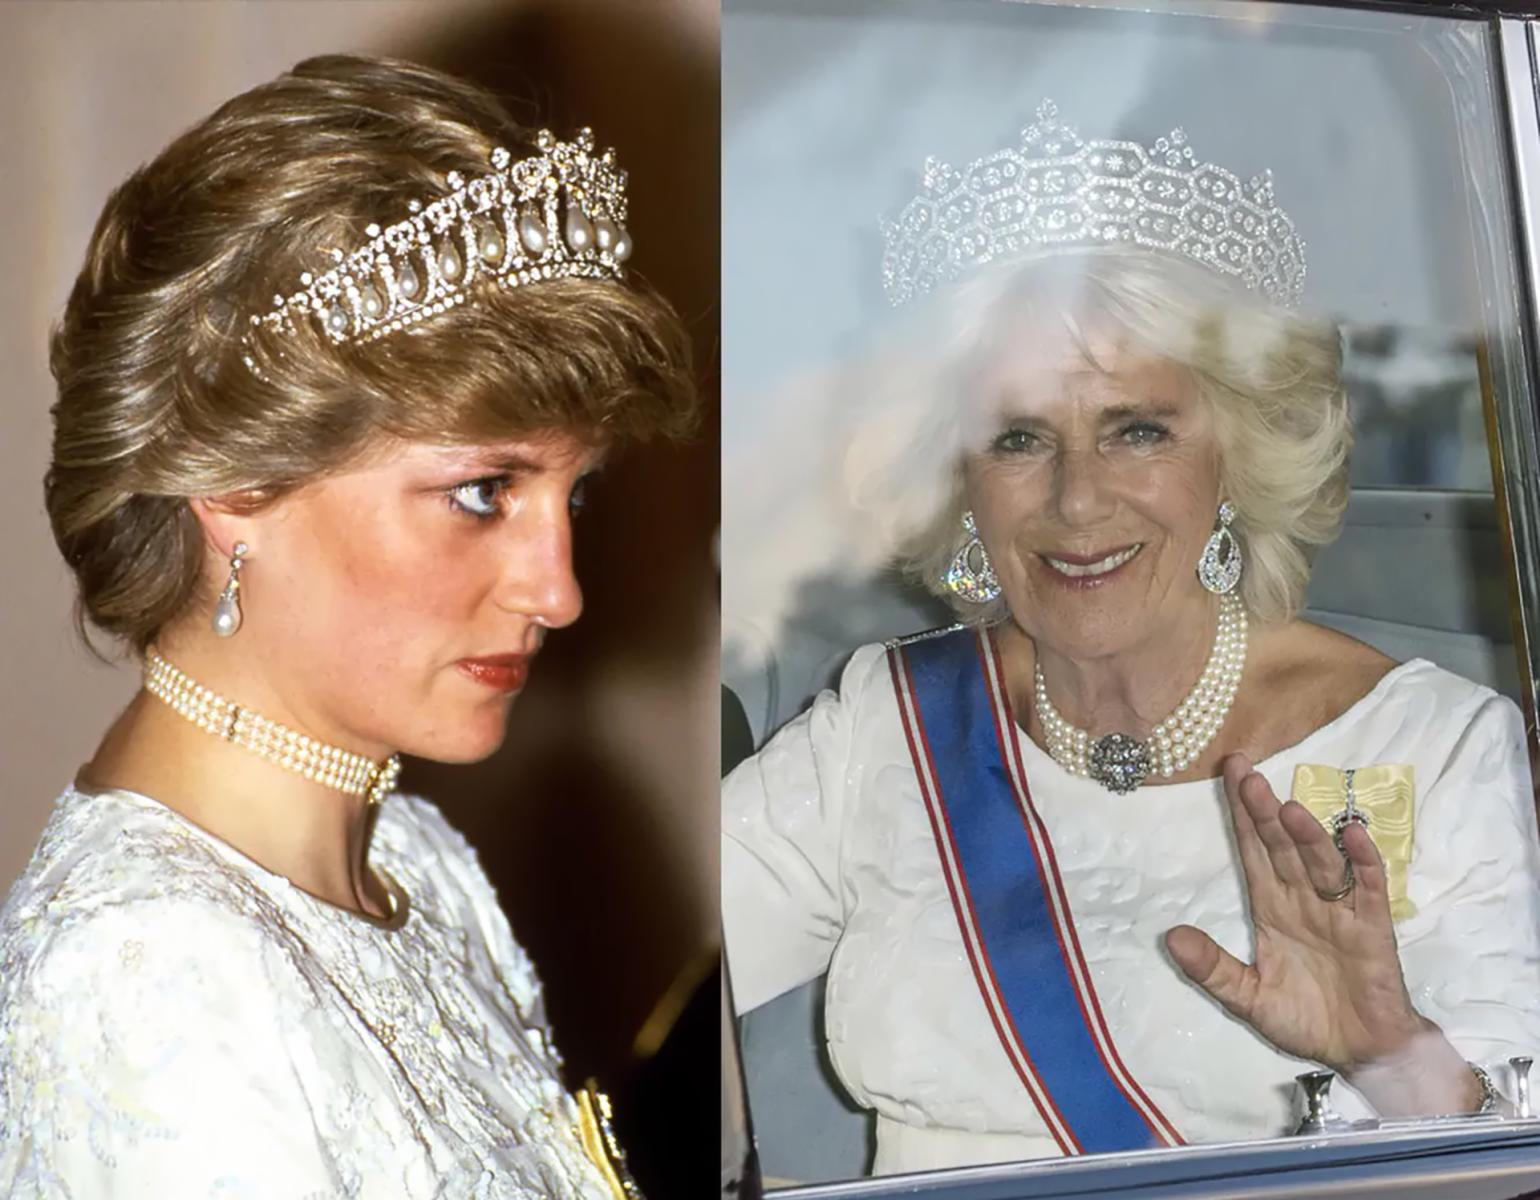 5 Times Camilla Parker Bowles Tried Copying Diana, and Failed - image 1